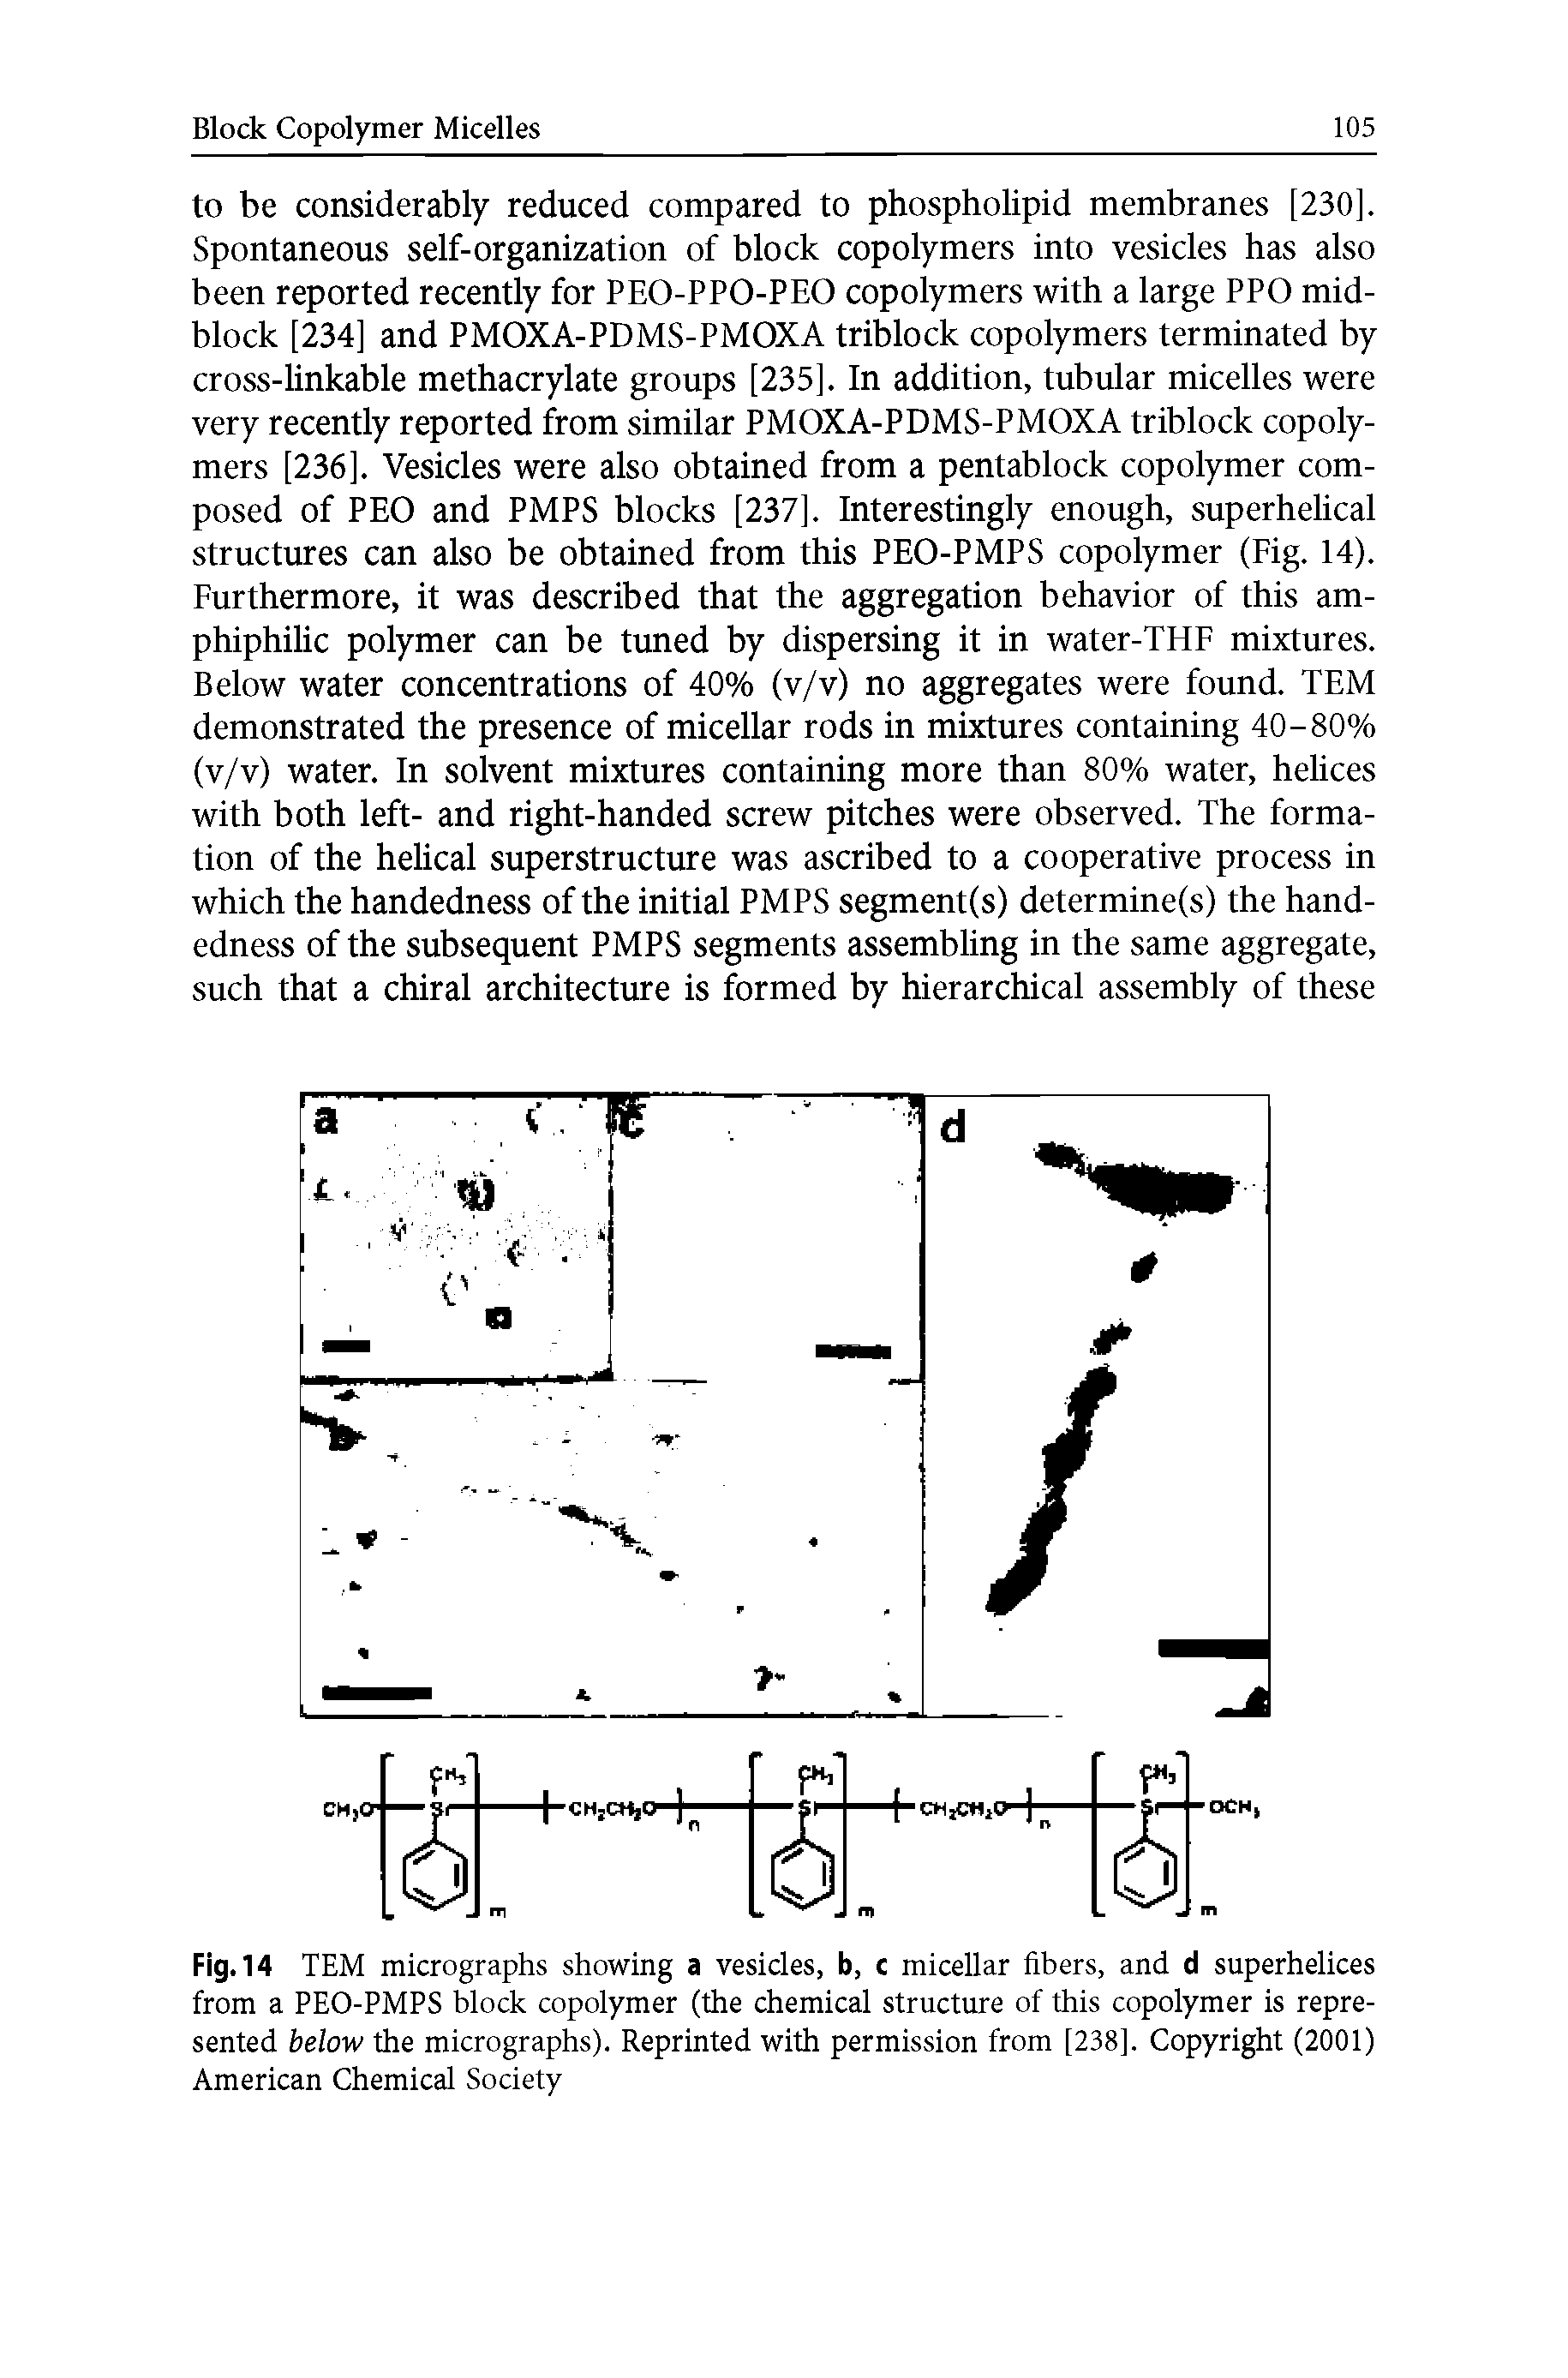 Fig. 14 TEM micrographs showing a vesicles, b, c micellar fibers, and d superhelices from a PEO-PMPS block copolymer (the chemical structure of this copolymer is represented below the micrographs). Reprinted with permission from [238]. Copyright (2001) American Chemical Society...